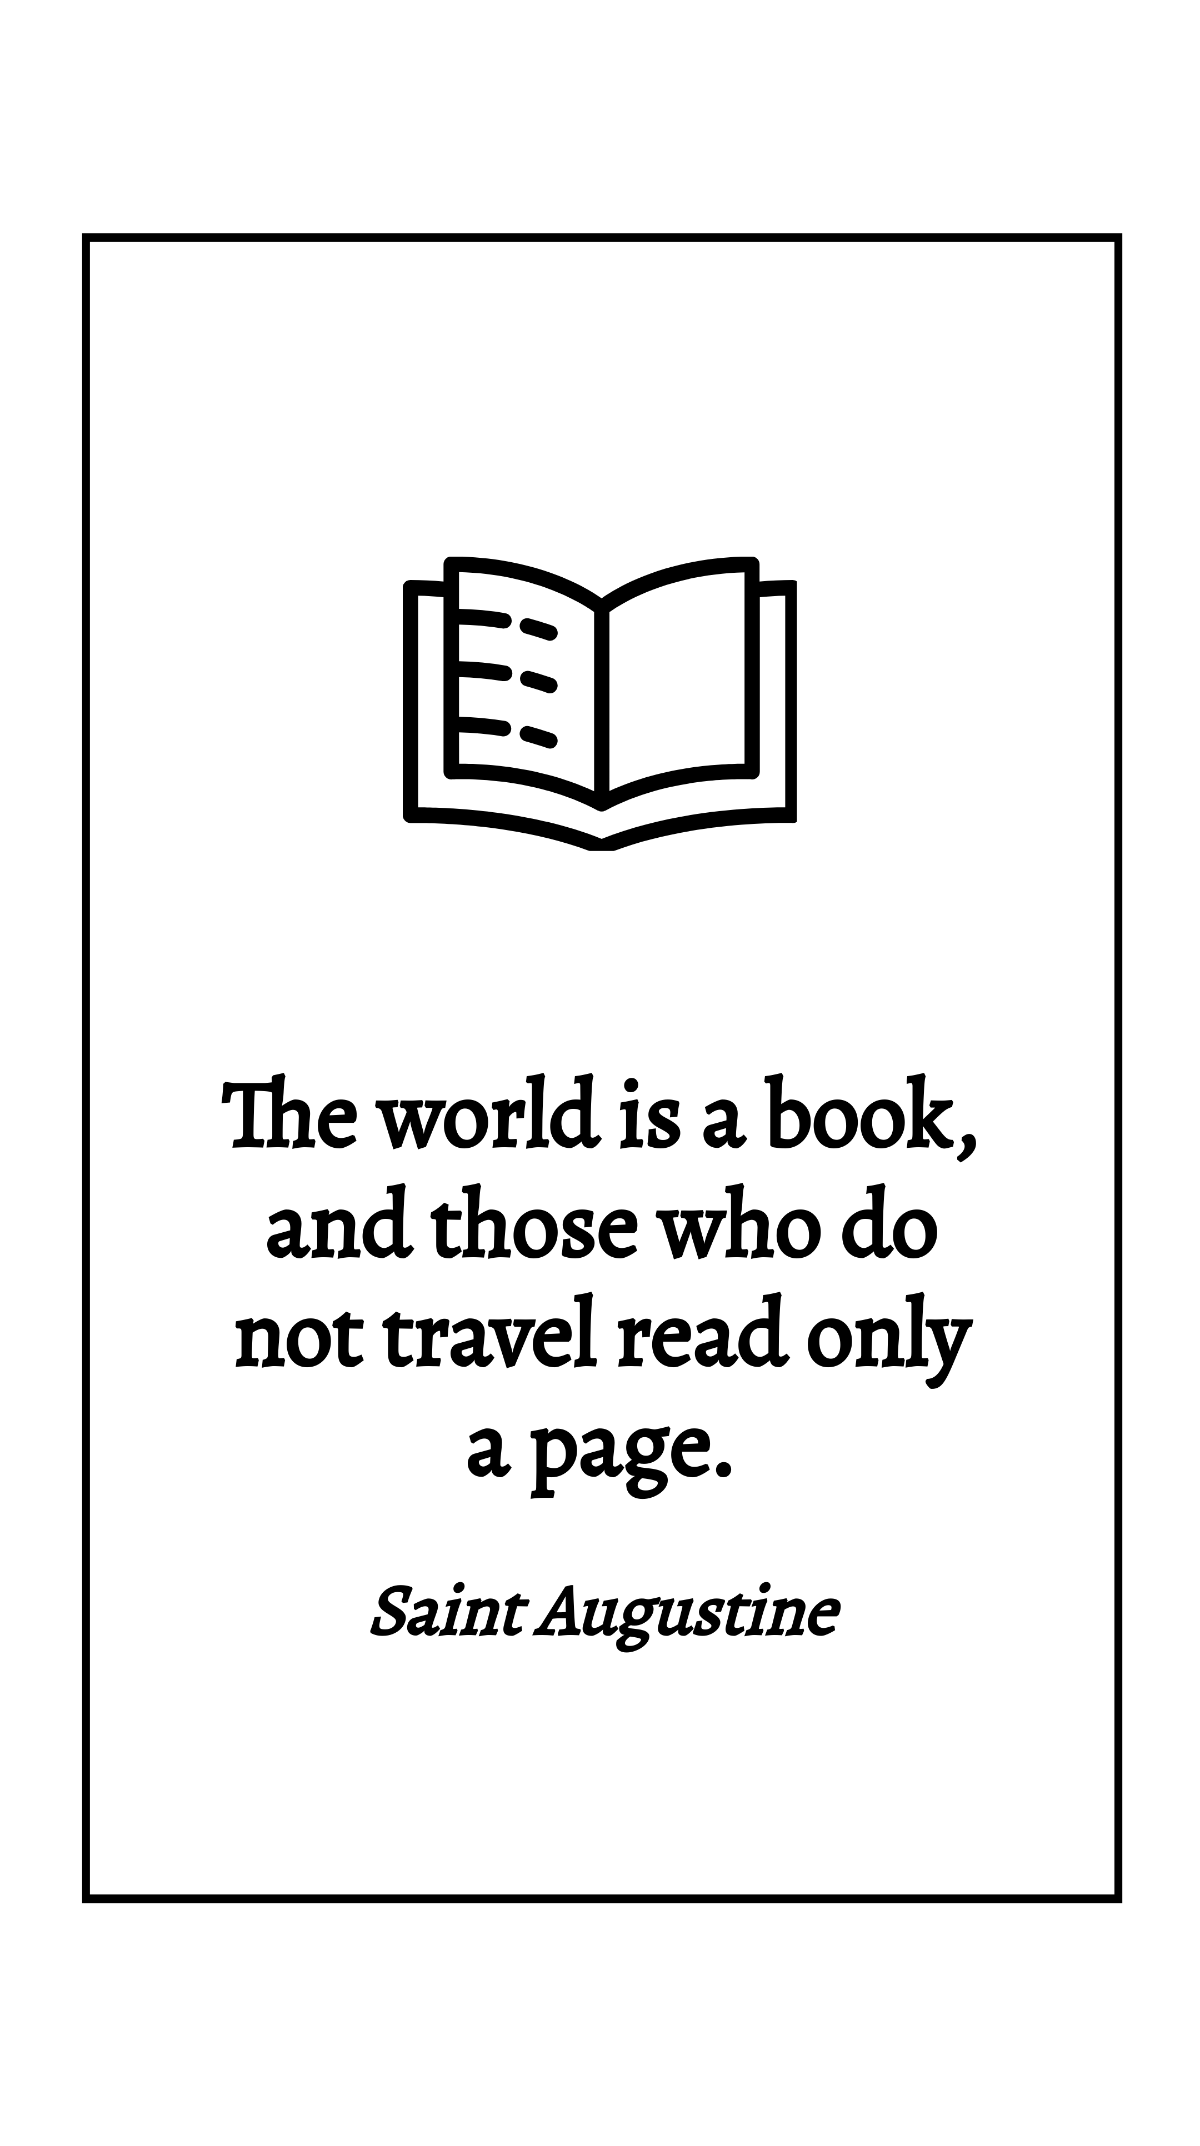 Free Saint Augustine - The world is a book, and those who do not travel read only a page. Template